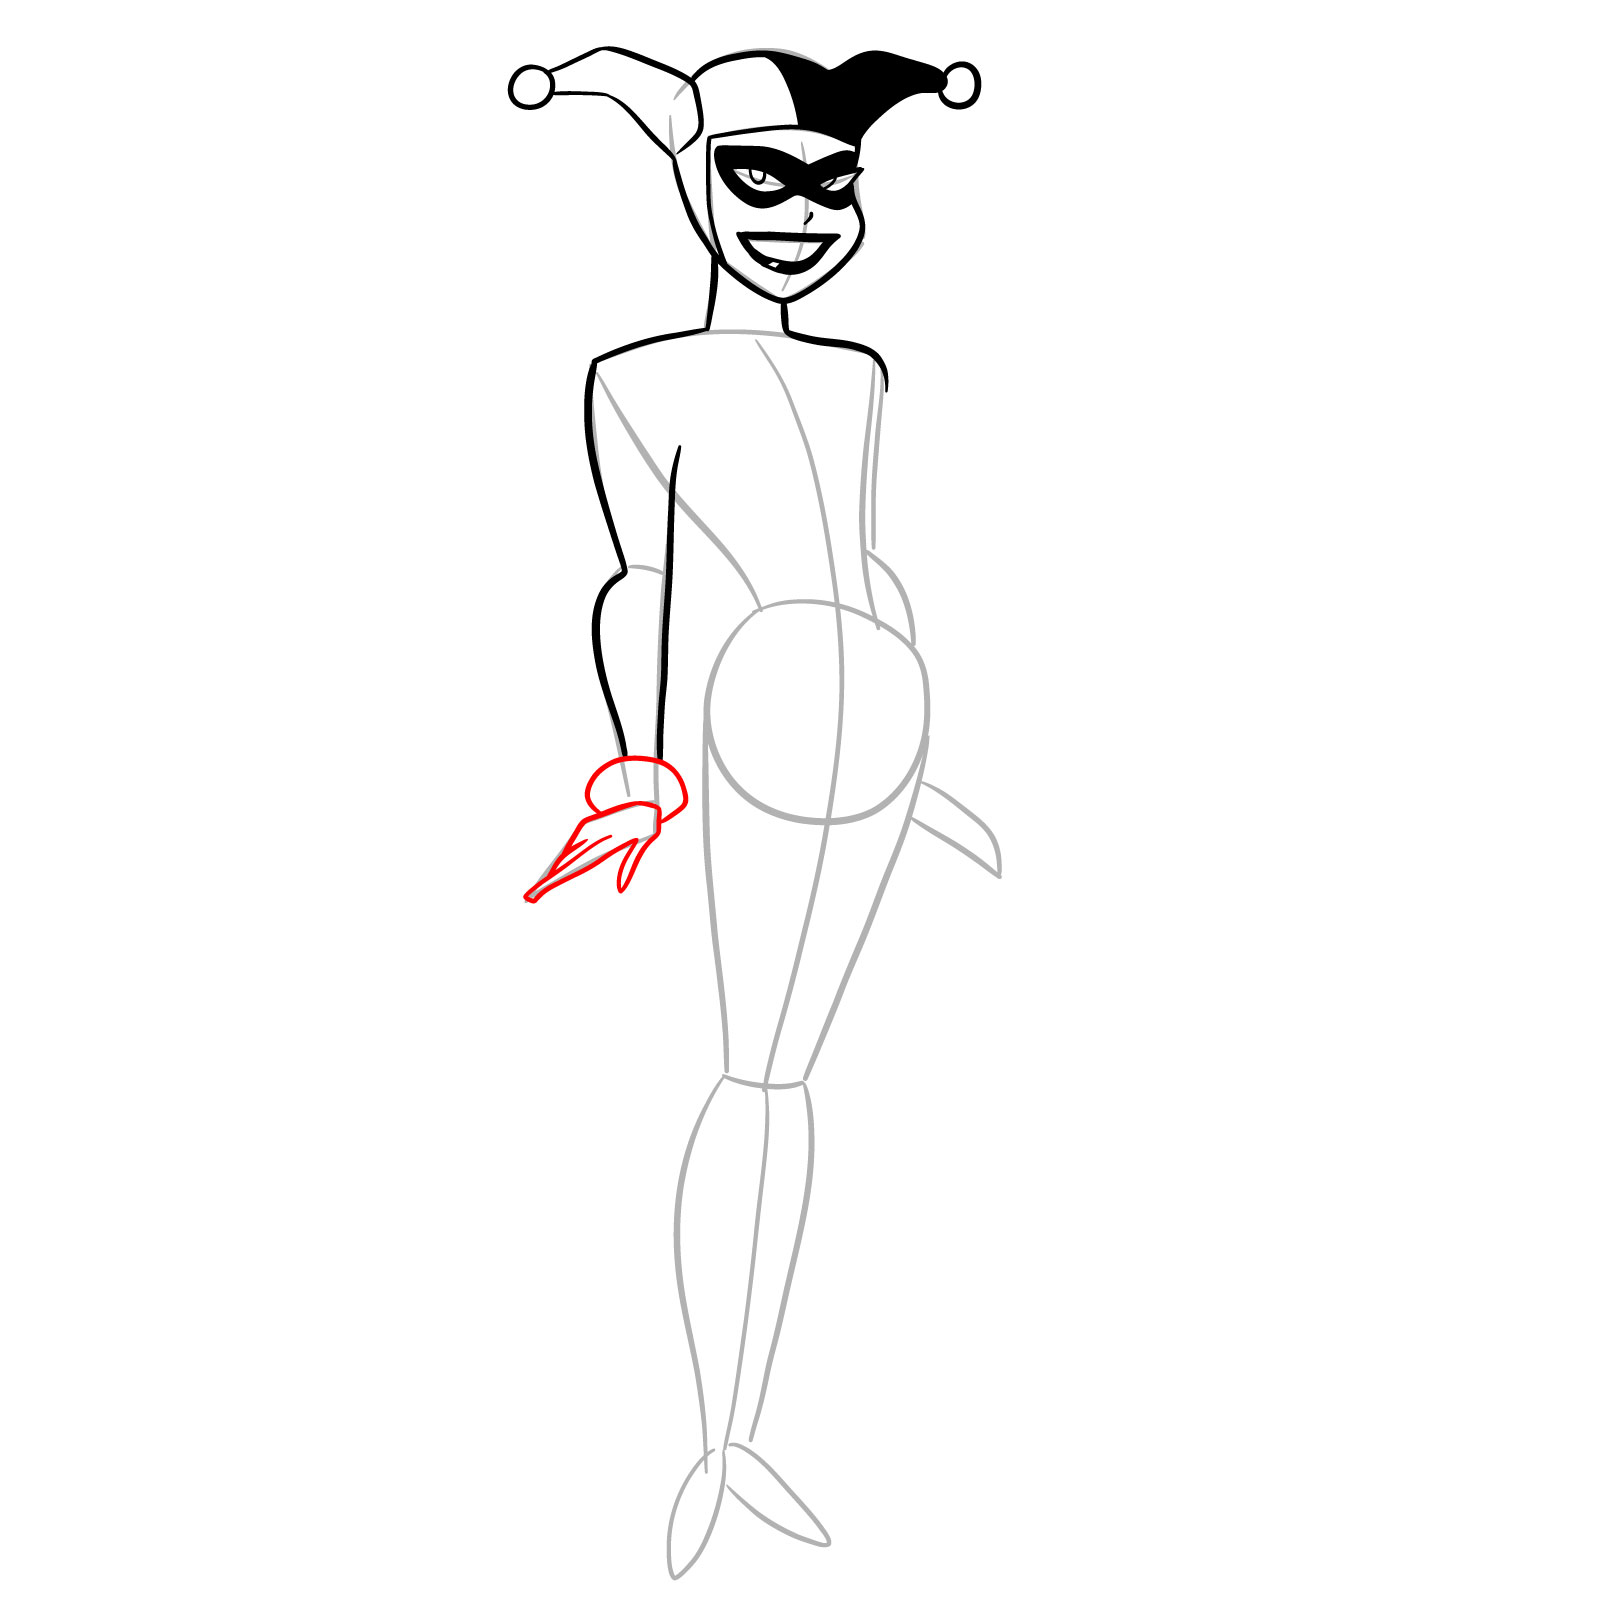 How to draw Harley Quinn in a classic suit - step 13